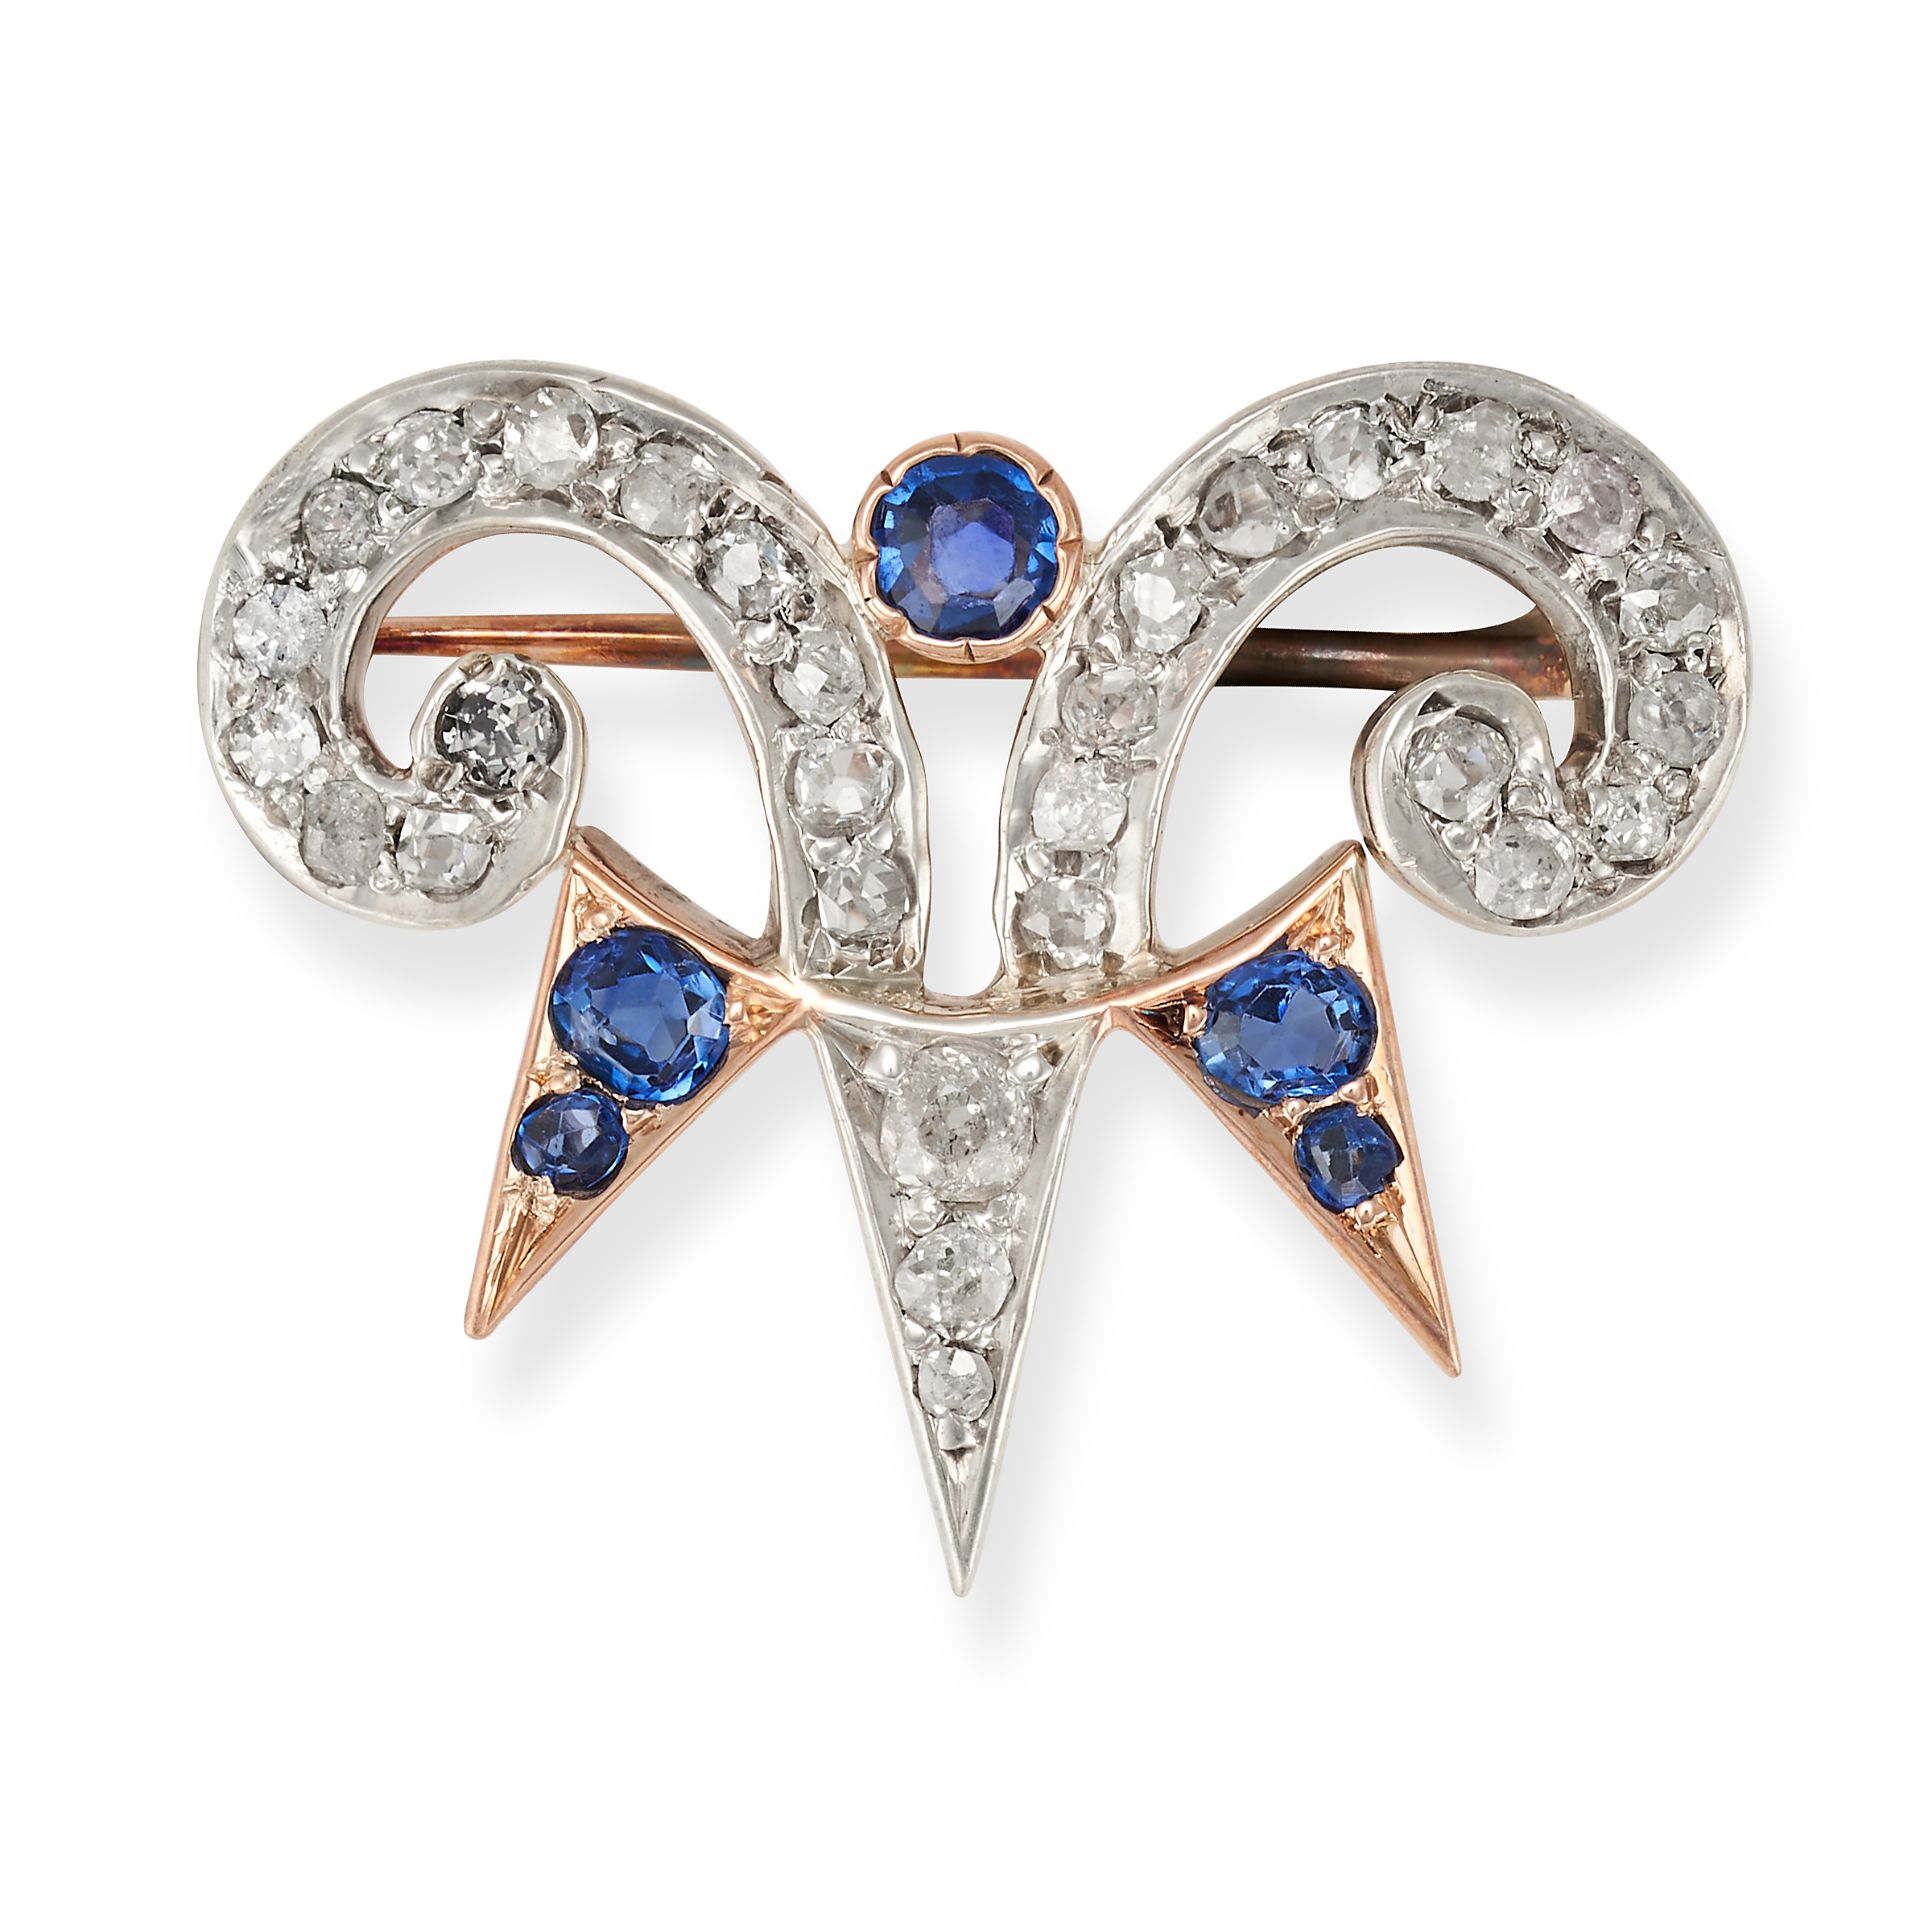 A DIAMOND AND SAPPHIRE BROOCH in silver and rose gold, designed as the initial A set with old cut...